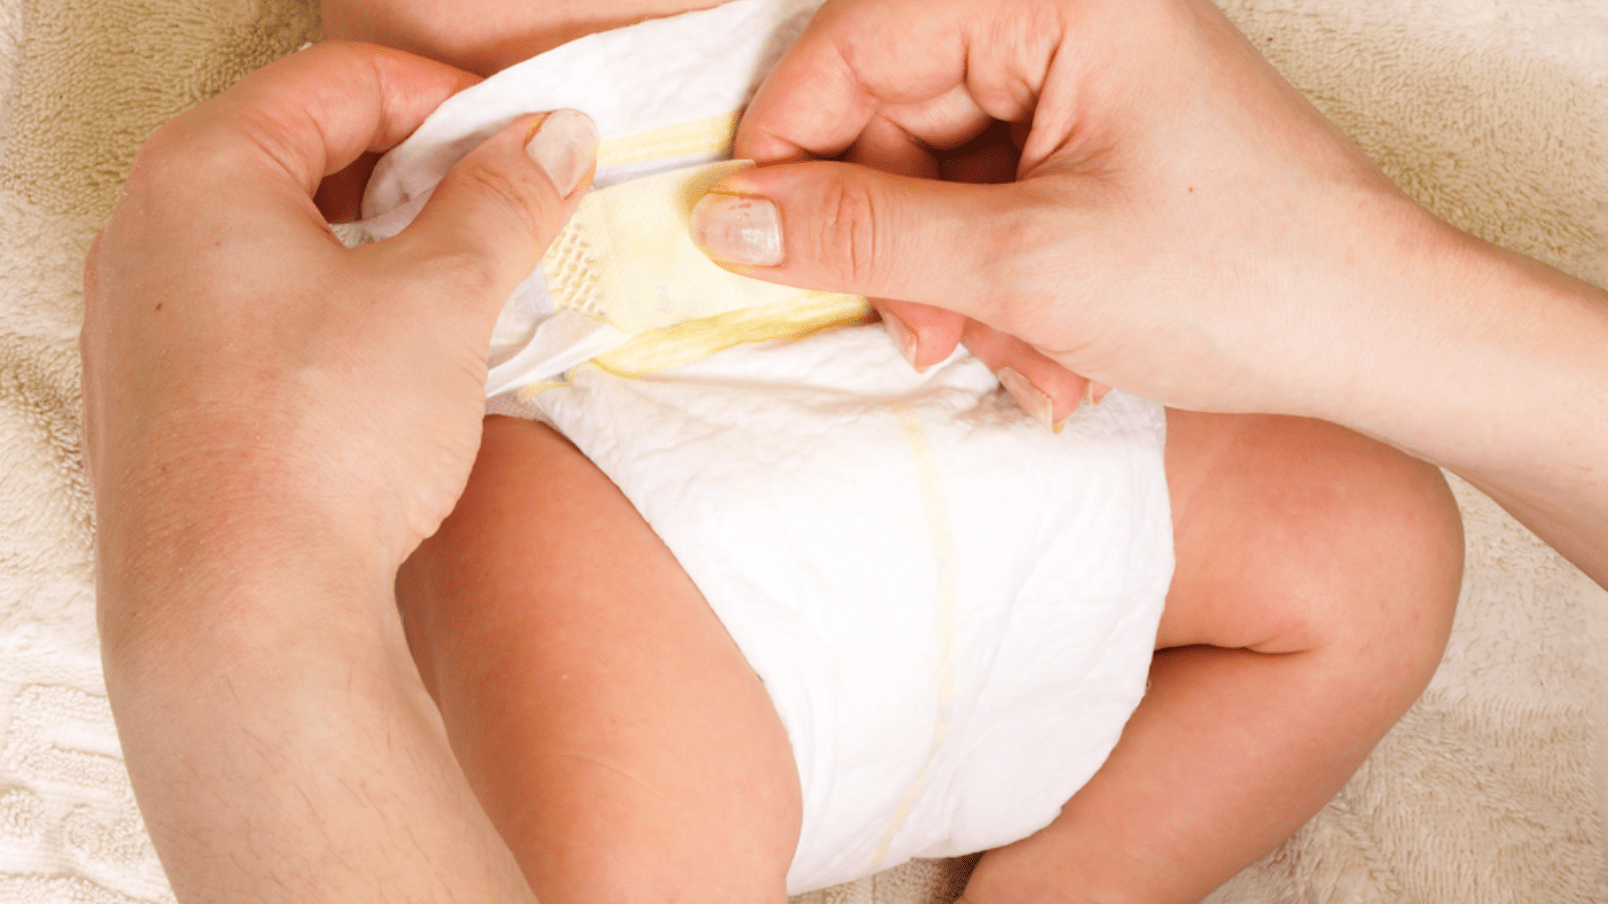 Changing a baby's diaper